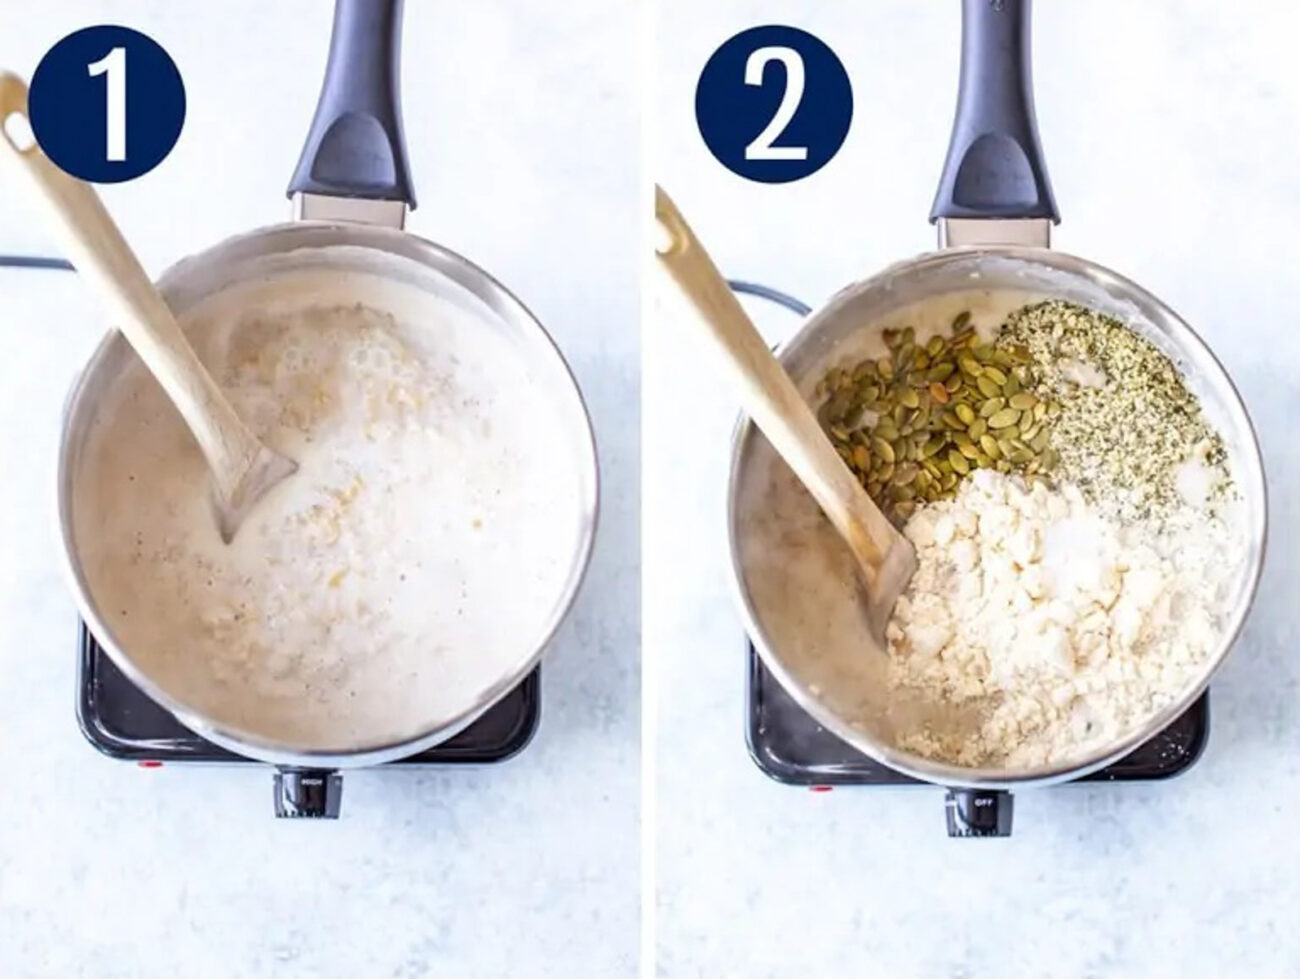 Steps 1 and 2 for making protein oatmeal: Start cooking oats until they expand.